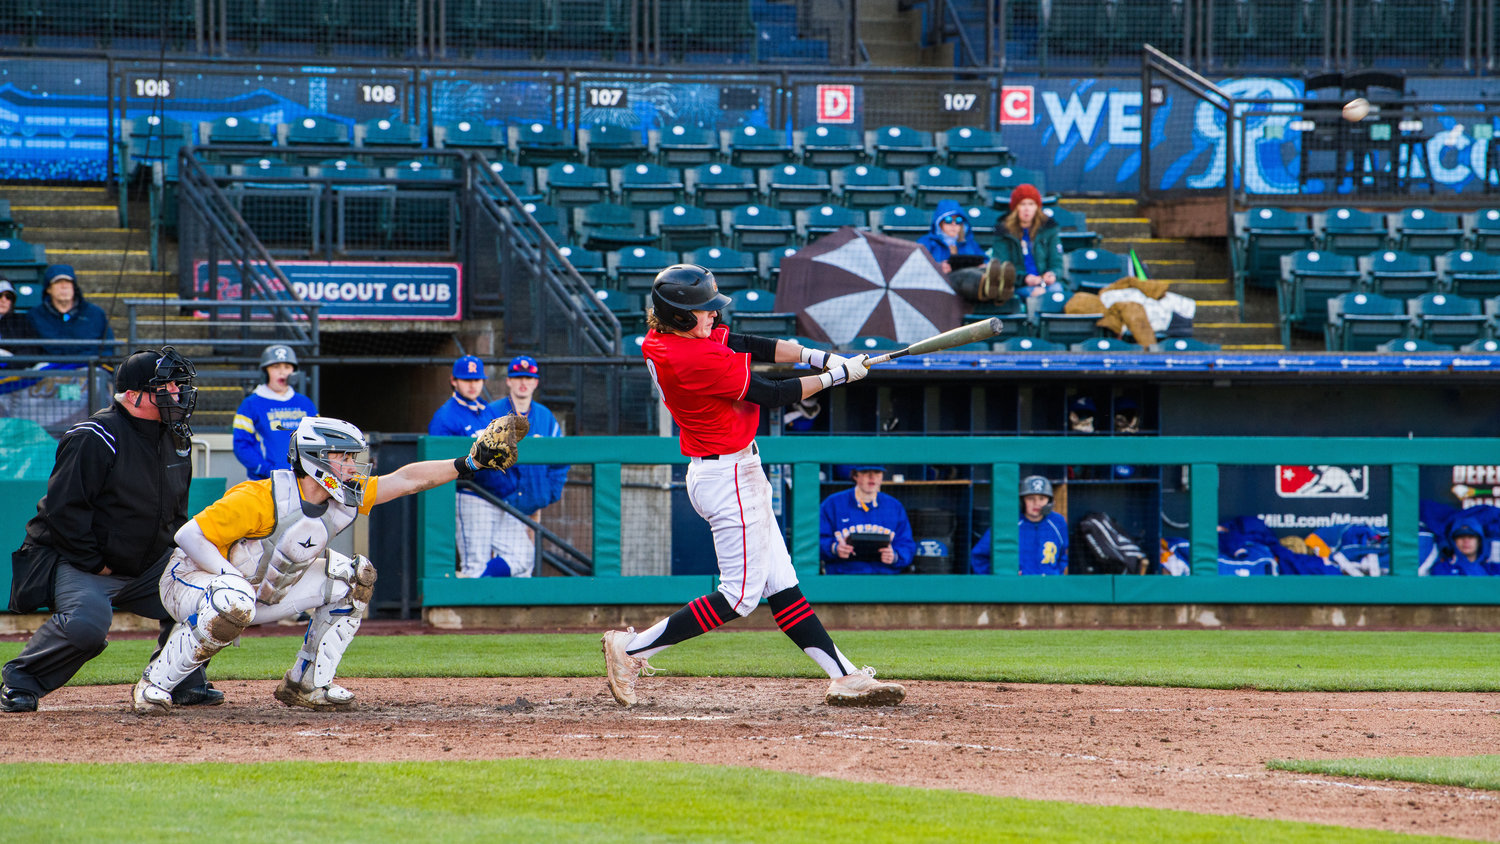 Tenino’s Kellan Knox (8) slams in a home run with a baserunner on at Cheney Stadium, home of the Tacoma Rainiers, during a Saturday afternoon game against Rochester.